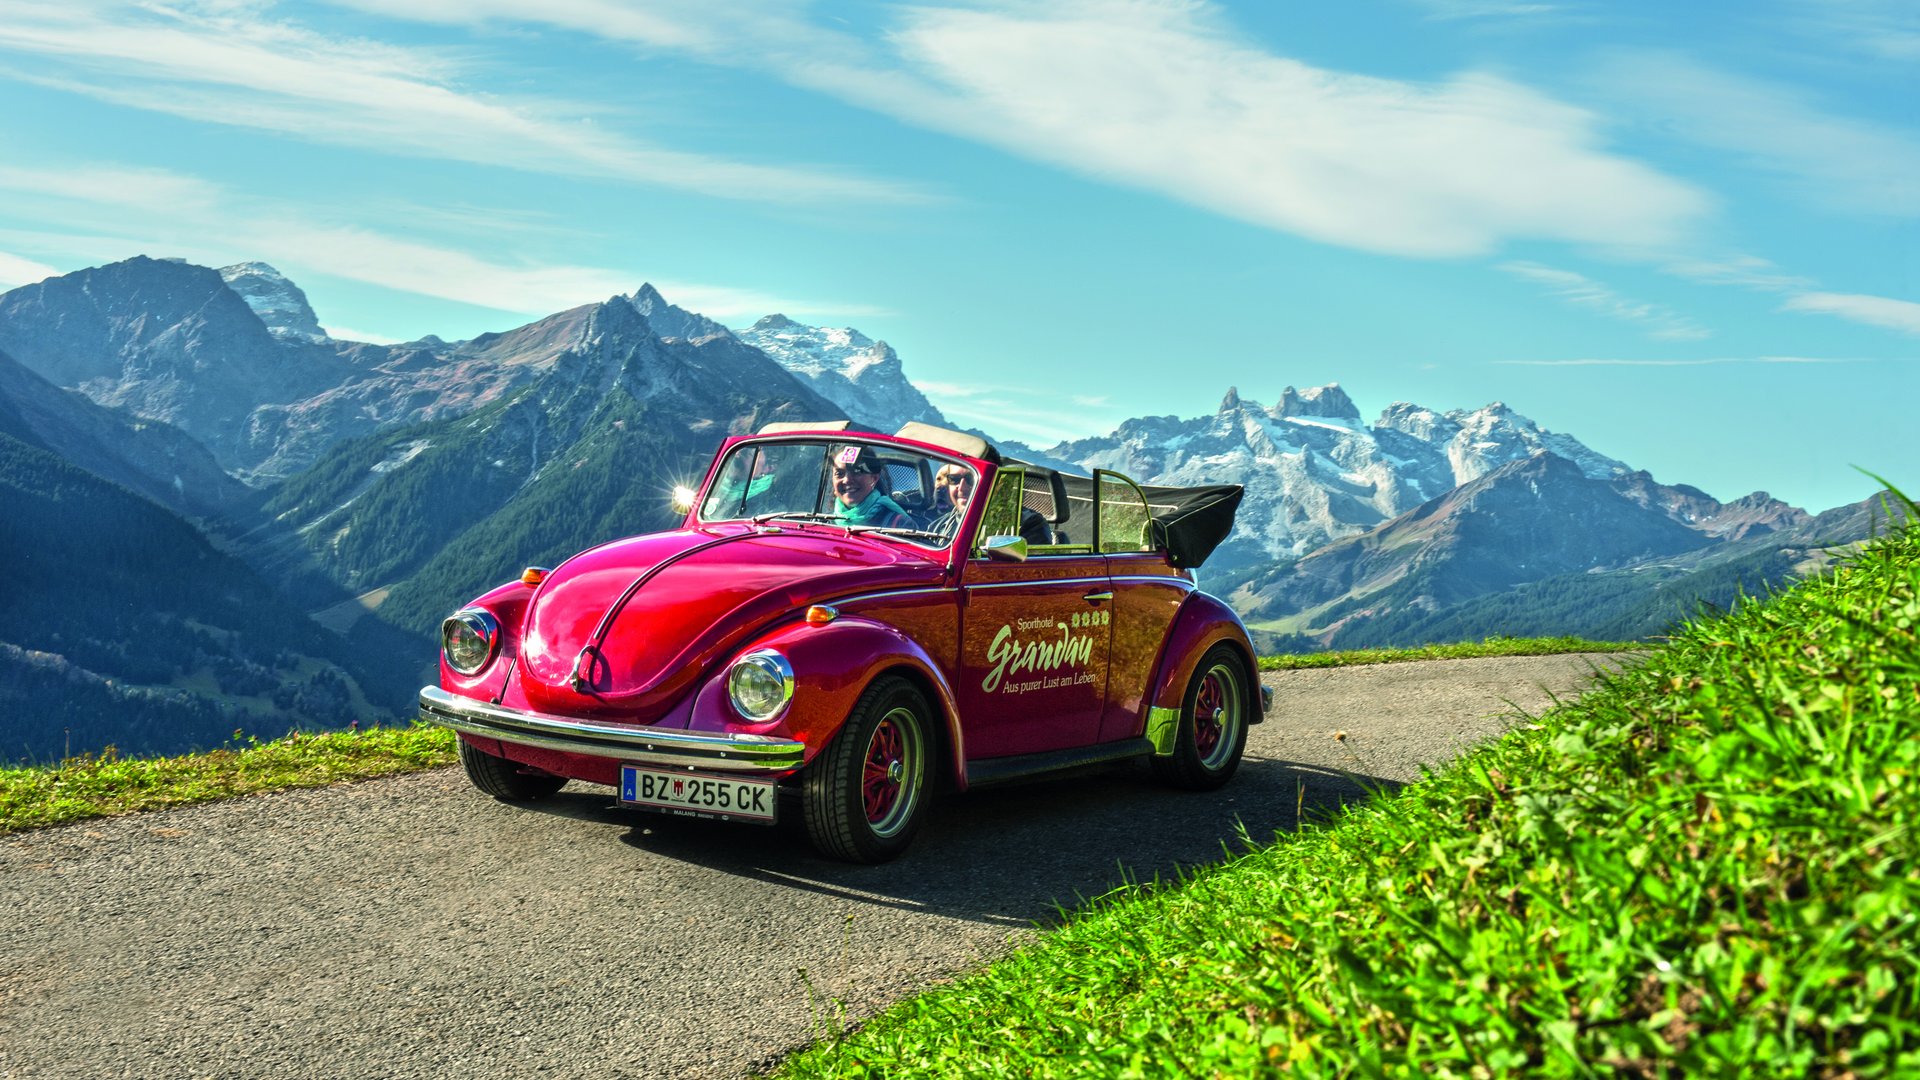 Accommodation in St. Gallenkirch for vintage car lovers